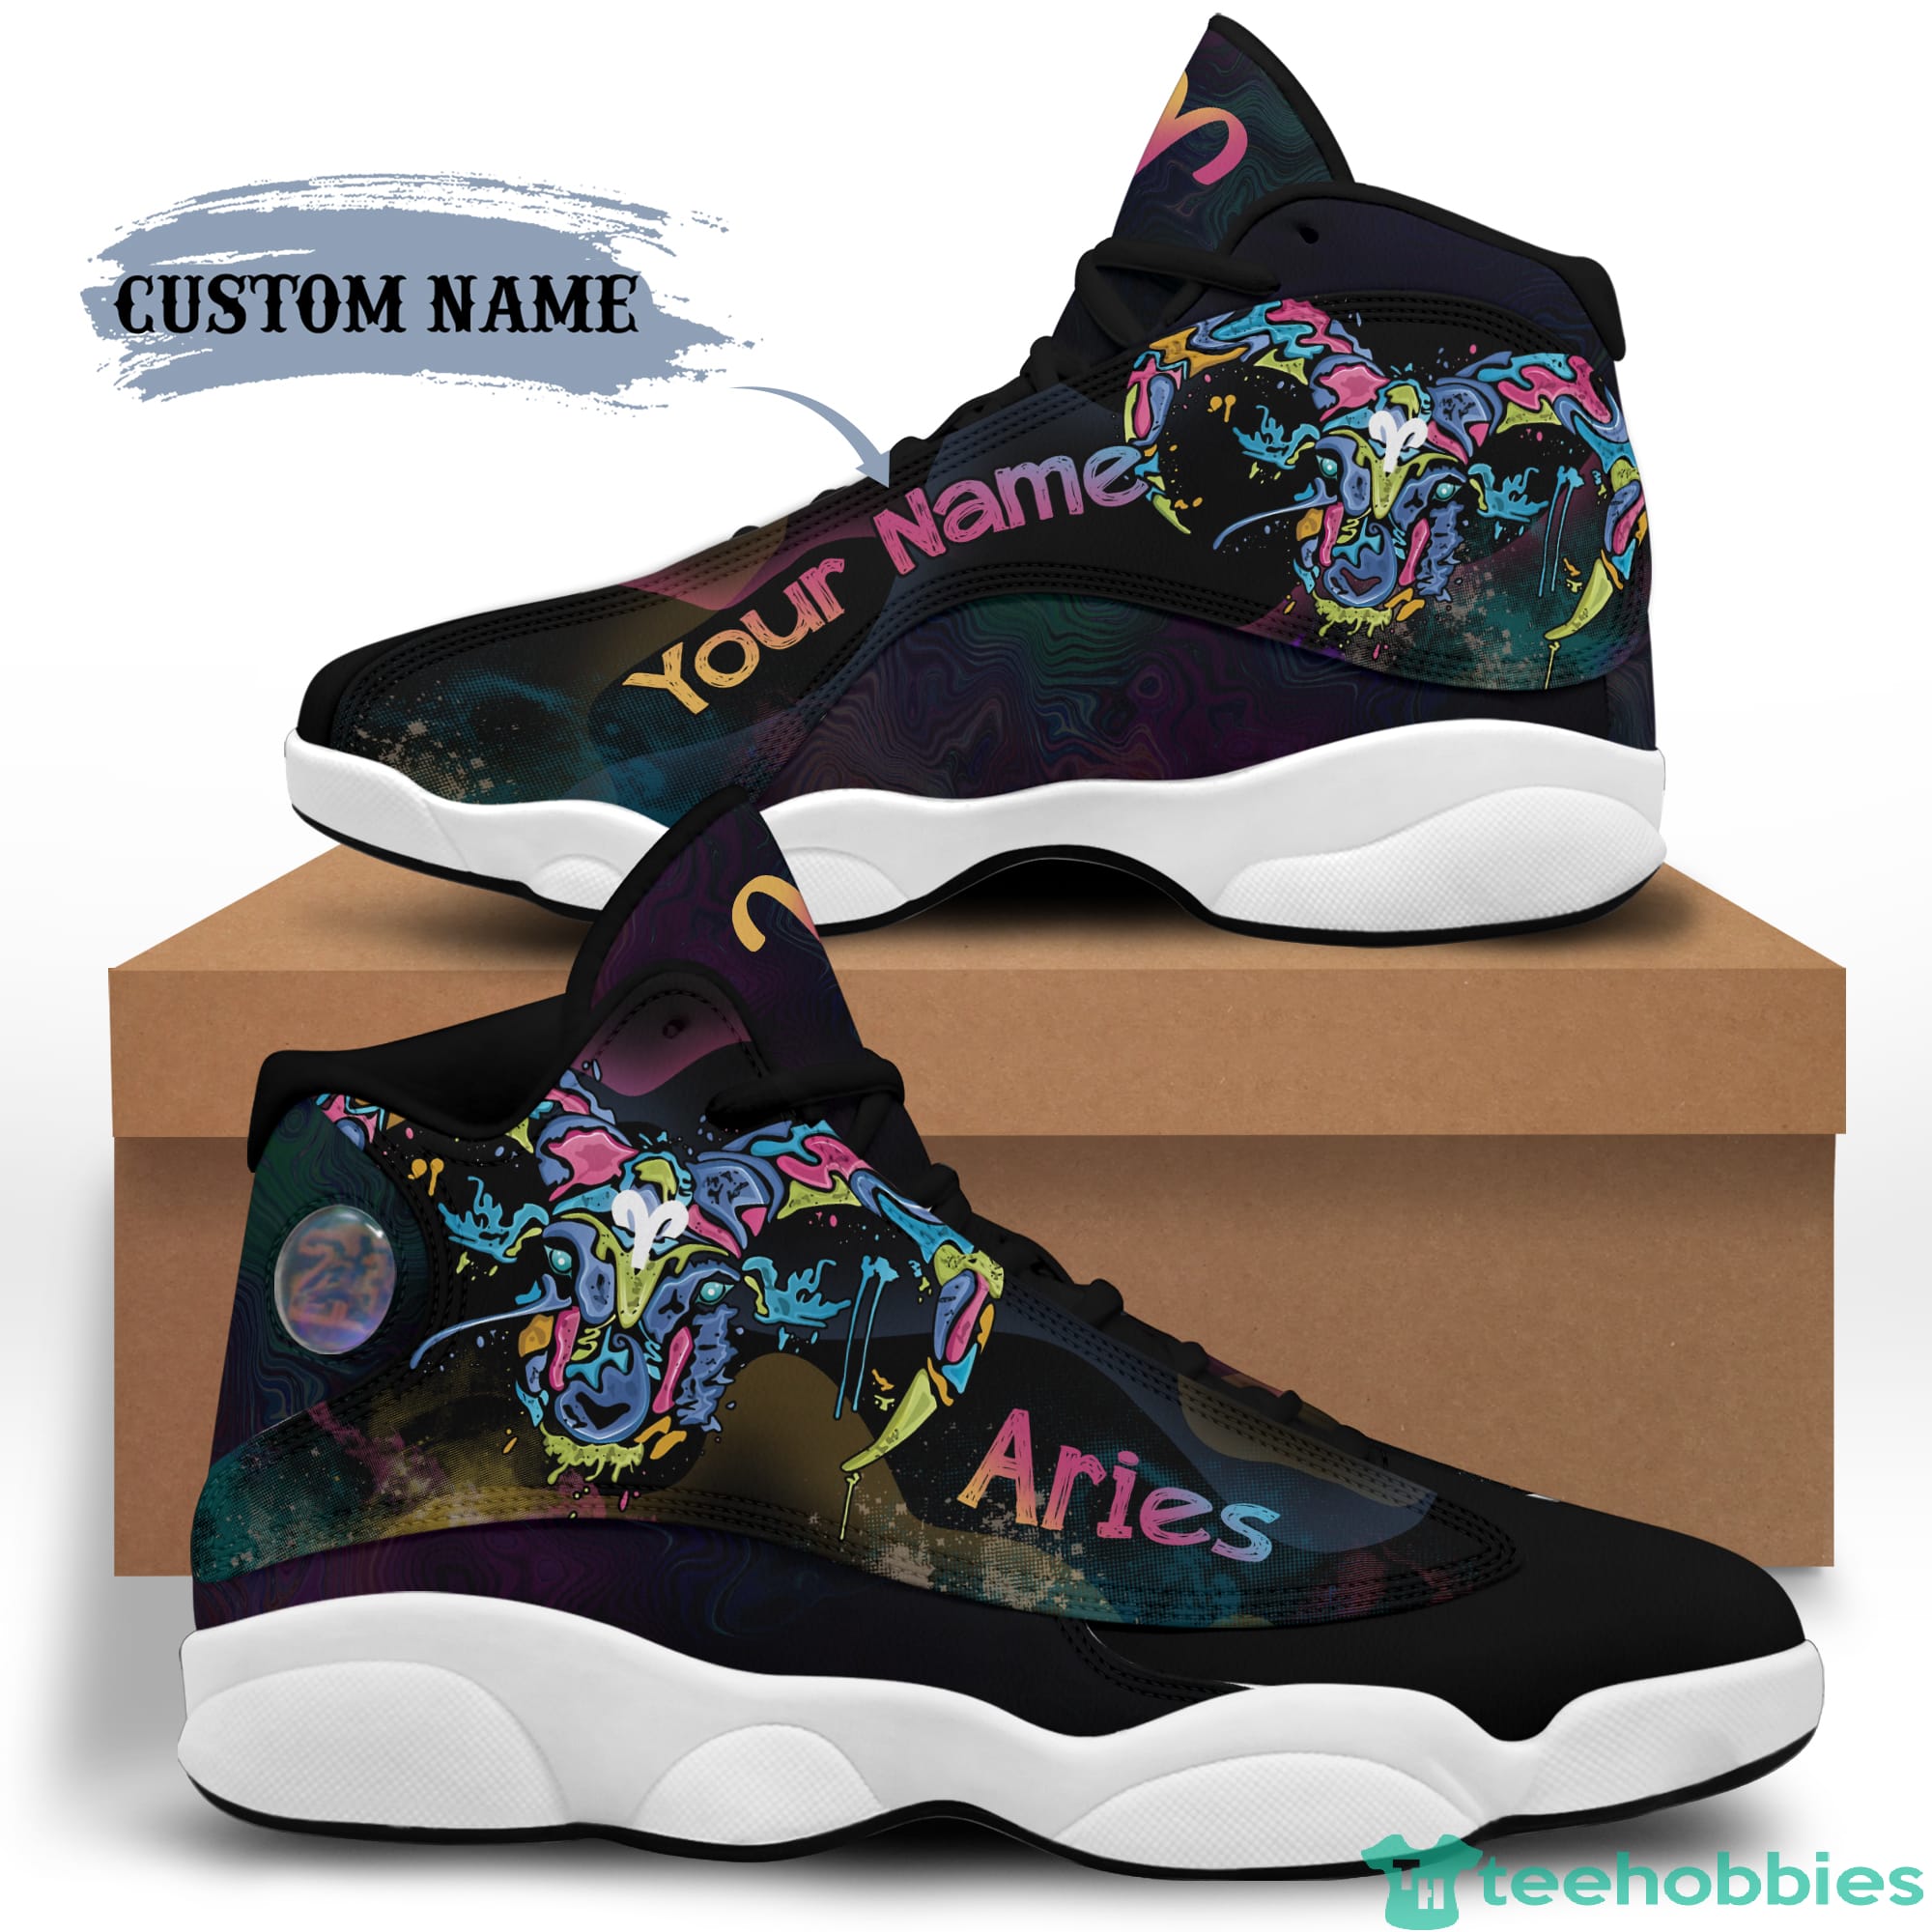 Aries Birthday Gift Personalized Name Personalized Name Air Jordan 13 Shoes SKU-283